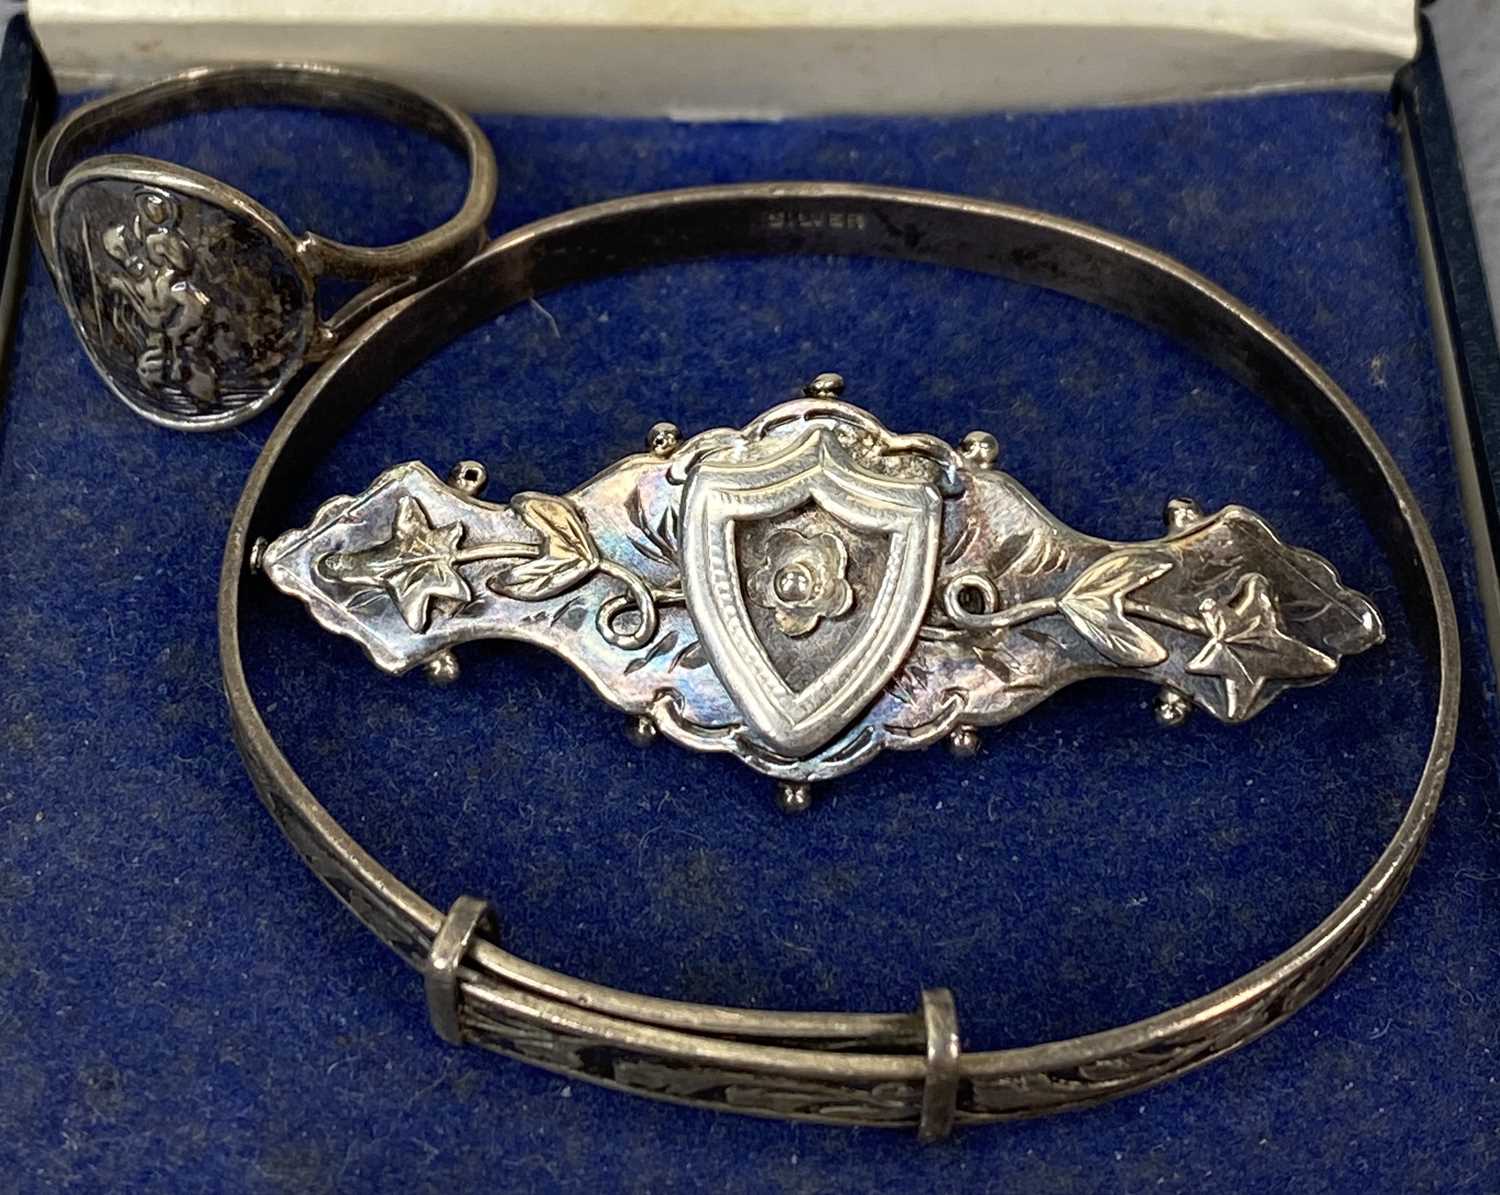 GROUP OF MIXED SILVER JEWELLERY including hollow silver bangle, scroll engrave decoration, child's - Image 3 of 5